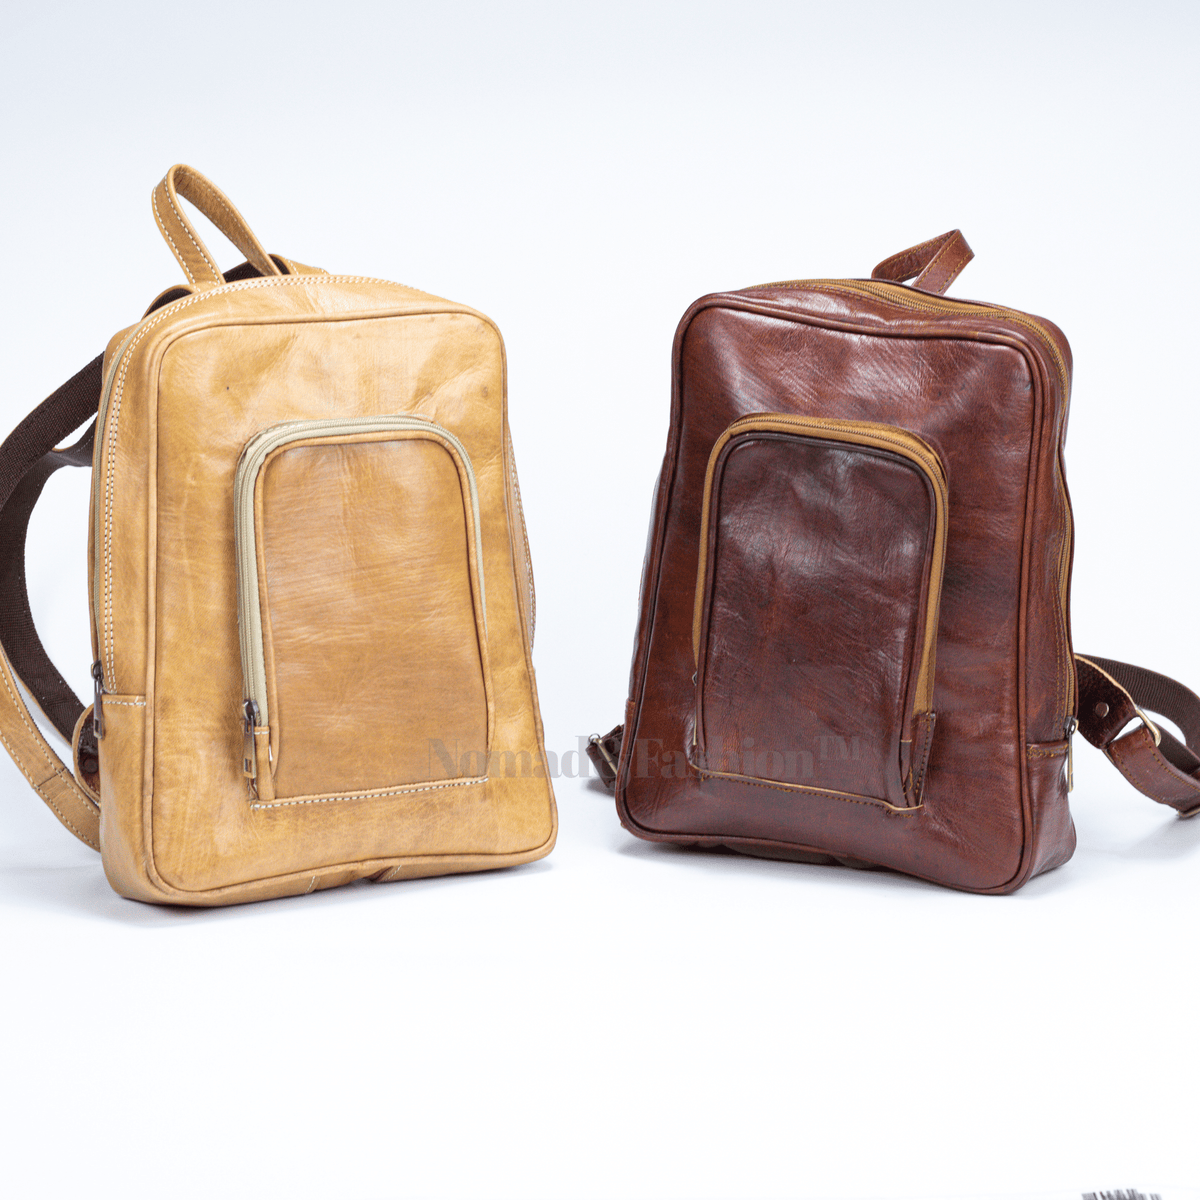 Nomad Trailblazer Mini Leather Backpack for outdoor